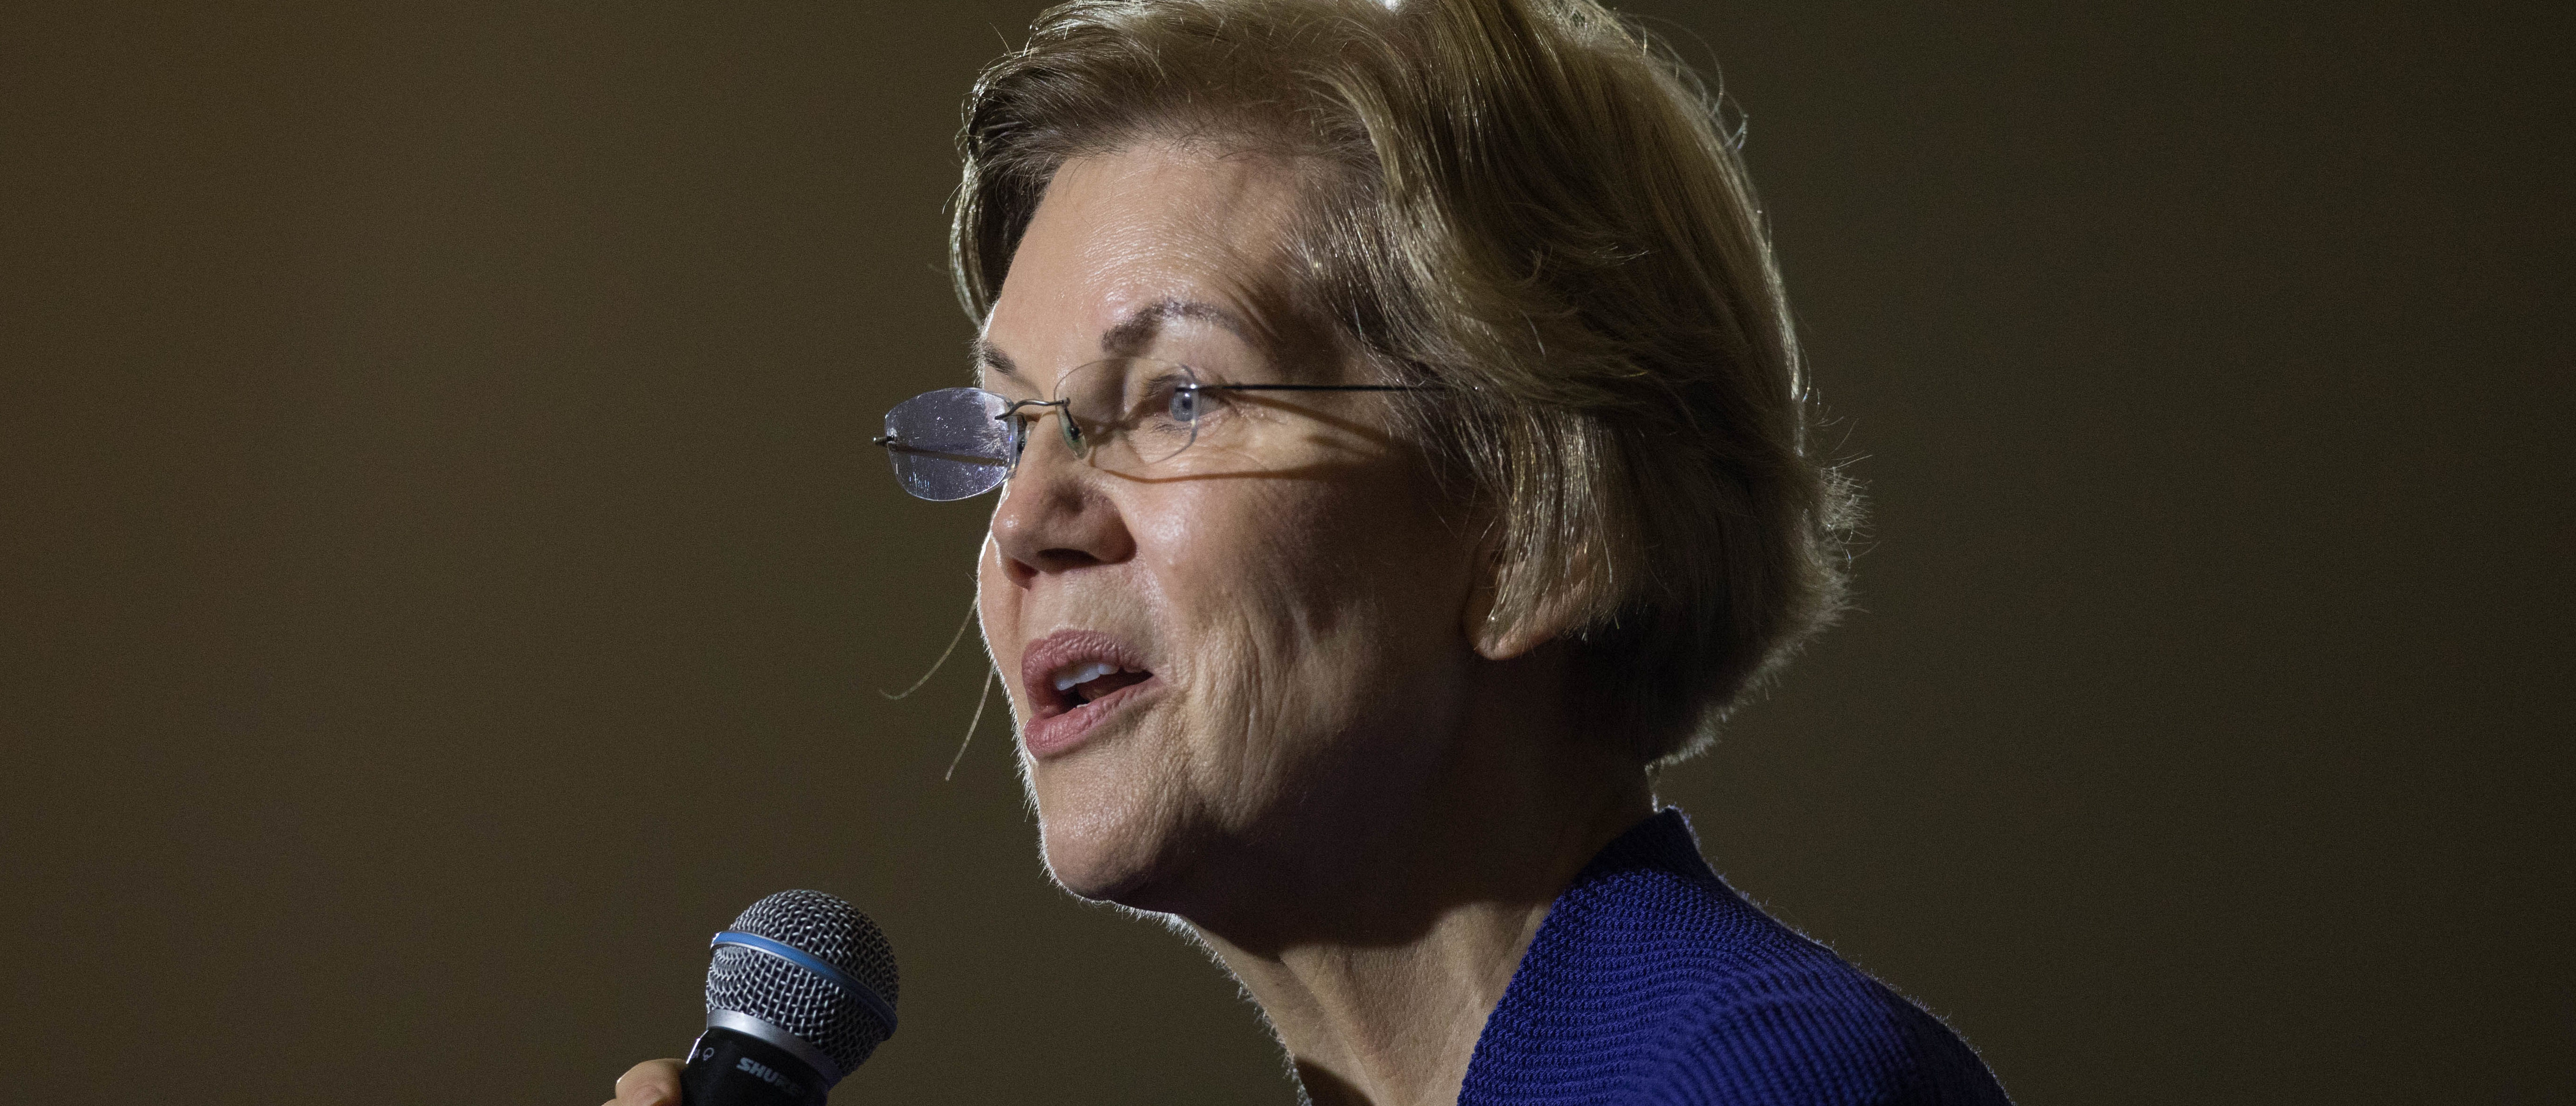 CONCORD, NH - JANUARY 02: Democratic presidential candidate Sen. Elizabeth Warren (D-MA) speaks on stage during her first campaign event of 2020 on January 2, 2020 in Concord, New Hampshire. The Iowa caucuses, the first nominating contest in the Democratic presidential primary season, will take place on February 3. (Photo by Scott Eisen/Getty Images)